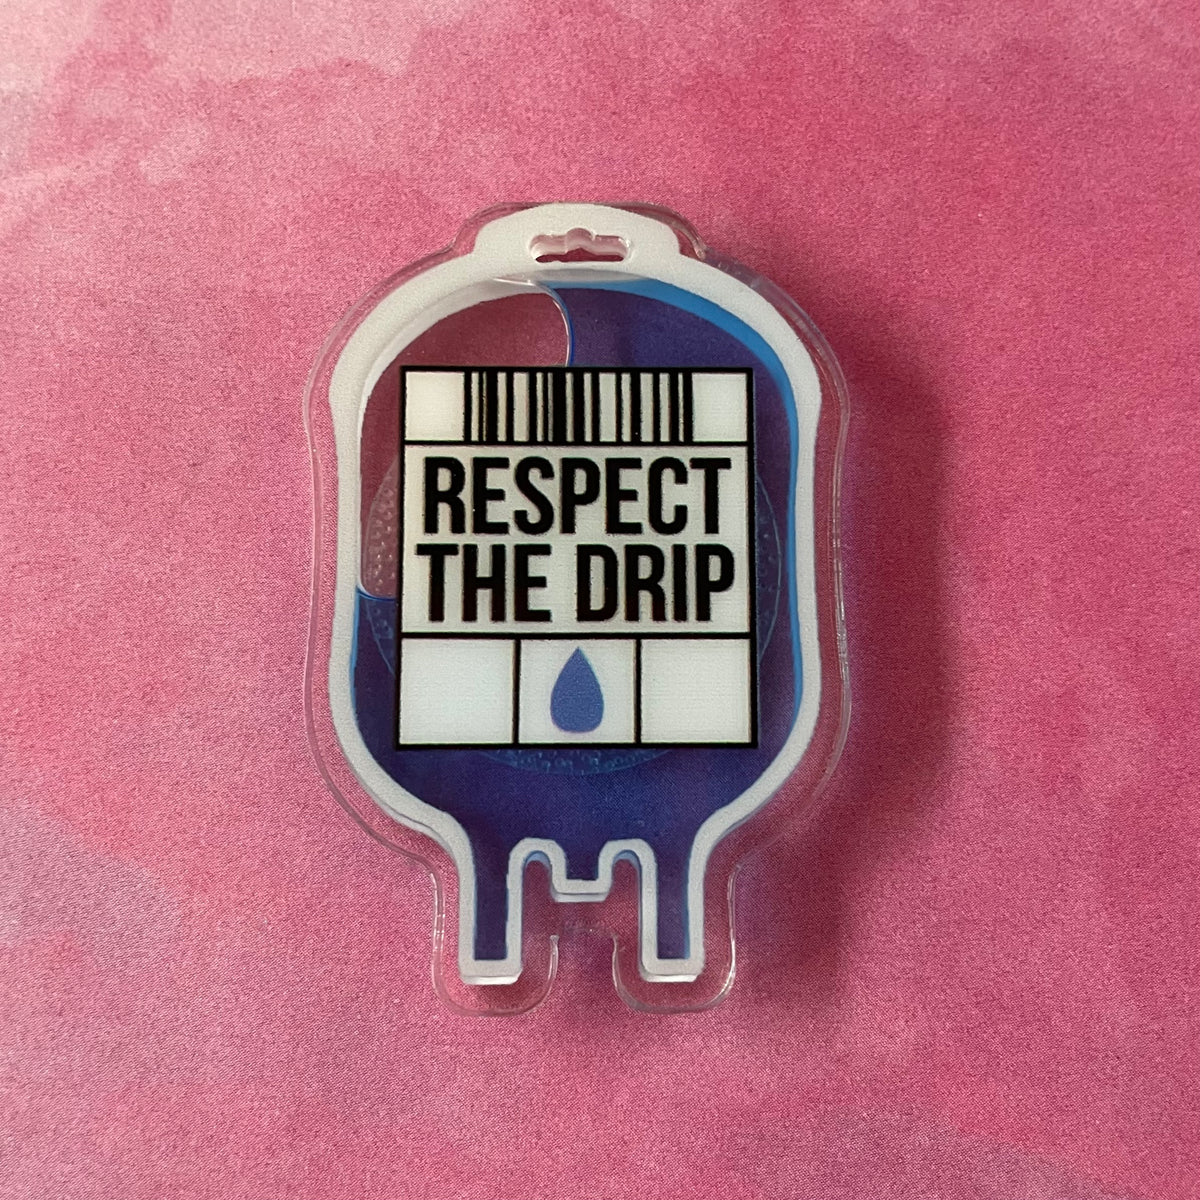 Respect the Drip IV Bag - Liquid Filled Swappable Badge Reel Design TOP